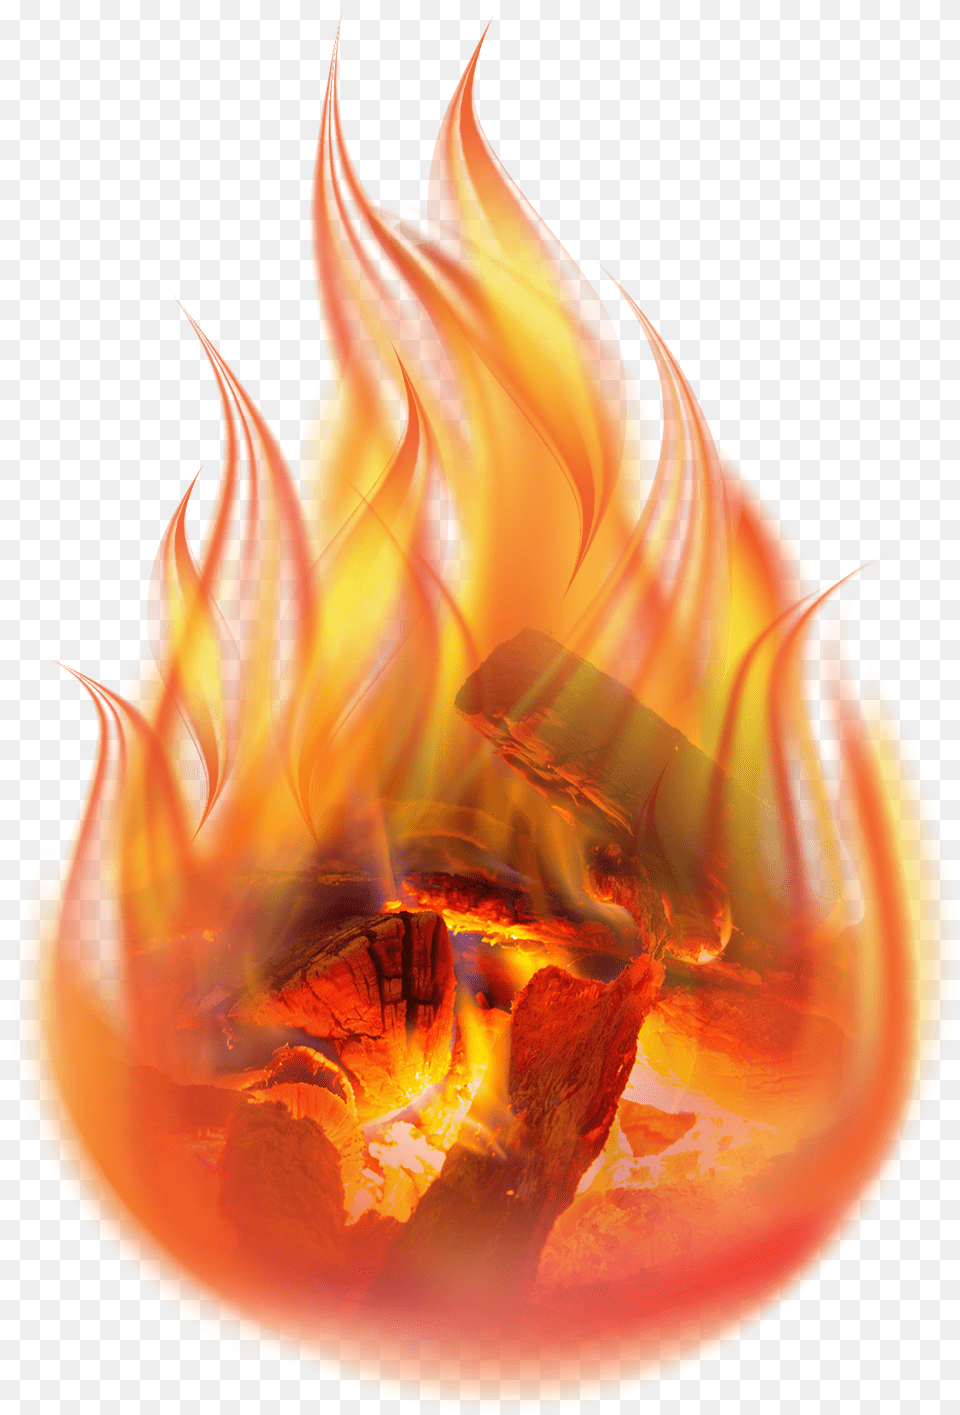 Cool Fire Transparent Fire In Air, Flame, Bonfire Png Image